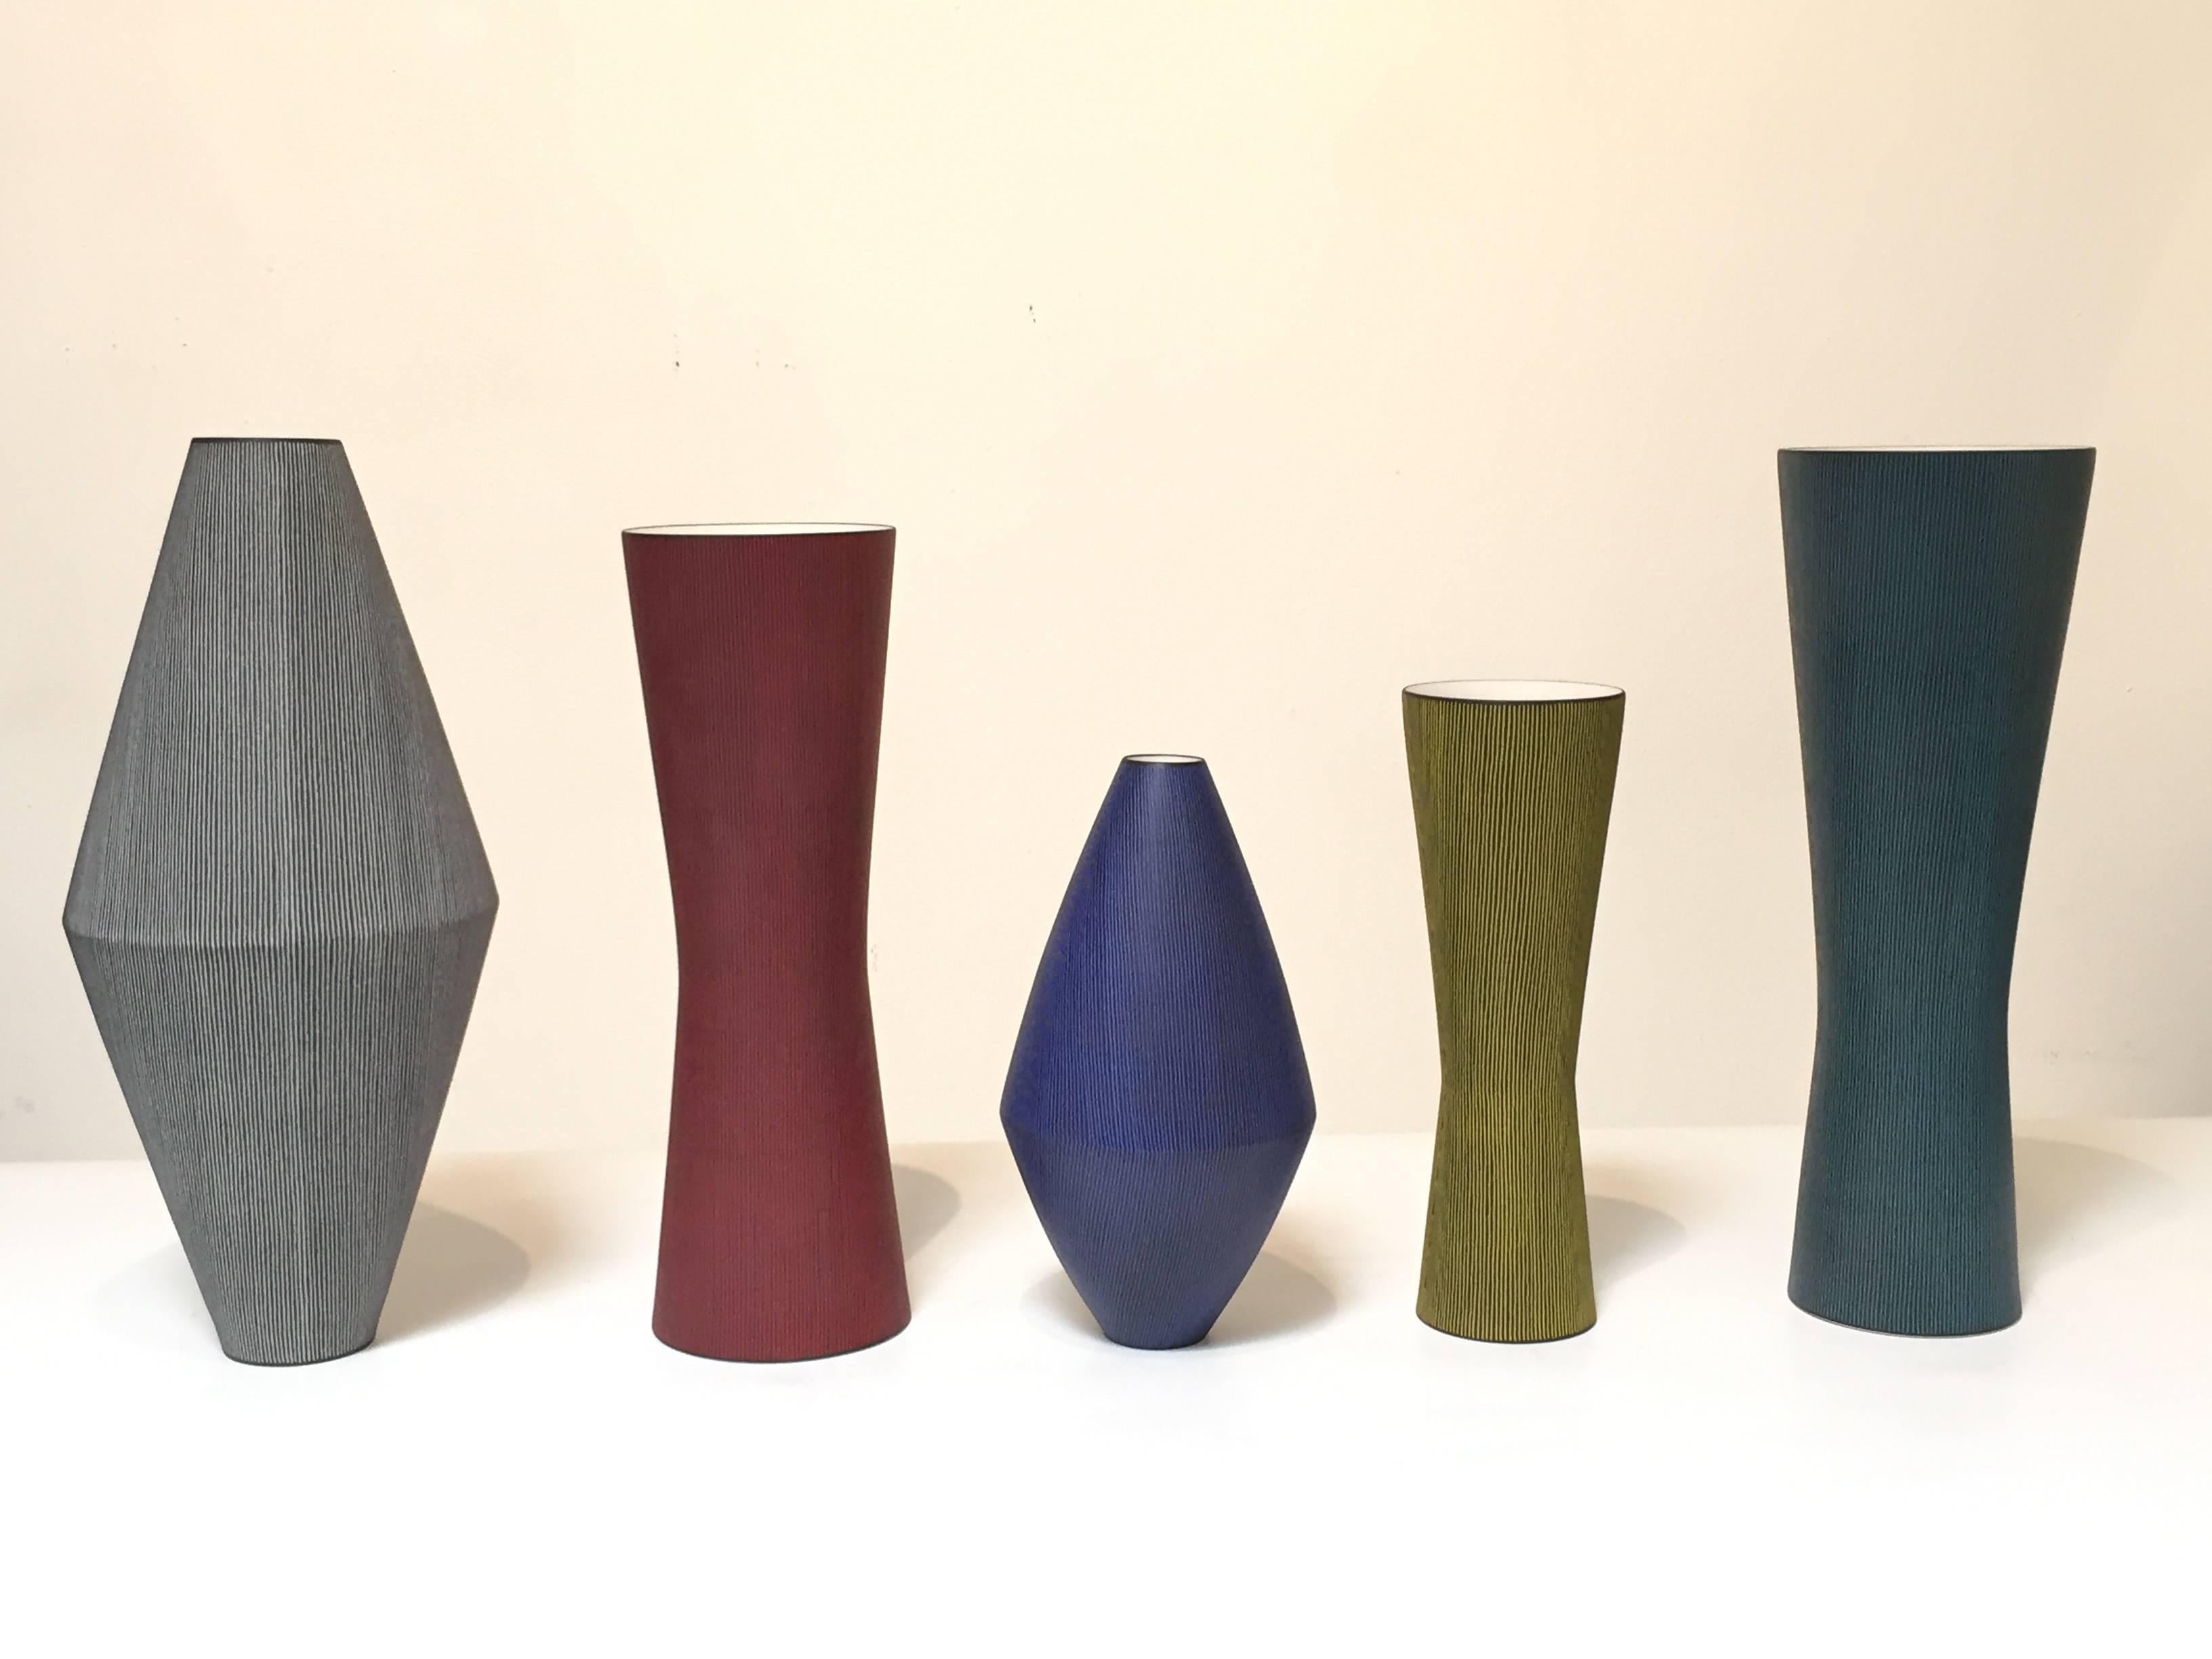 Group of Five Contemporary Porcelain Vases by Japanese Artist Masaru Nakada 5